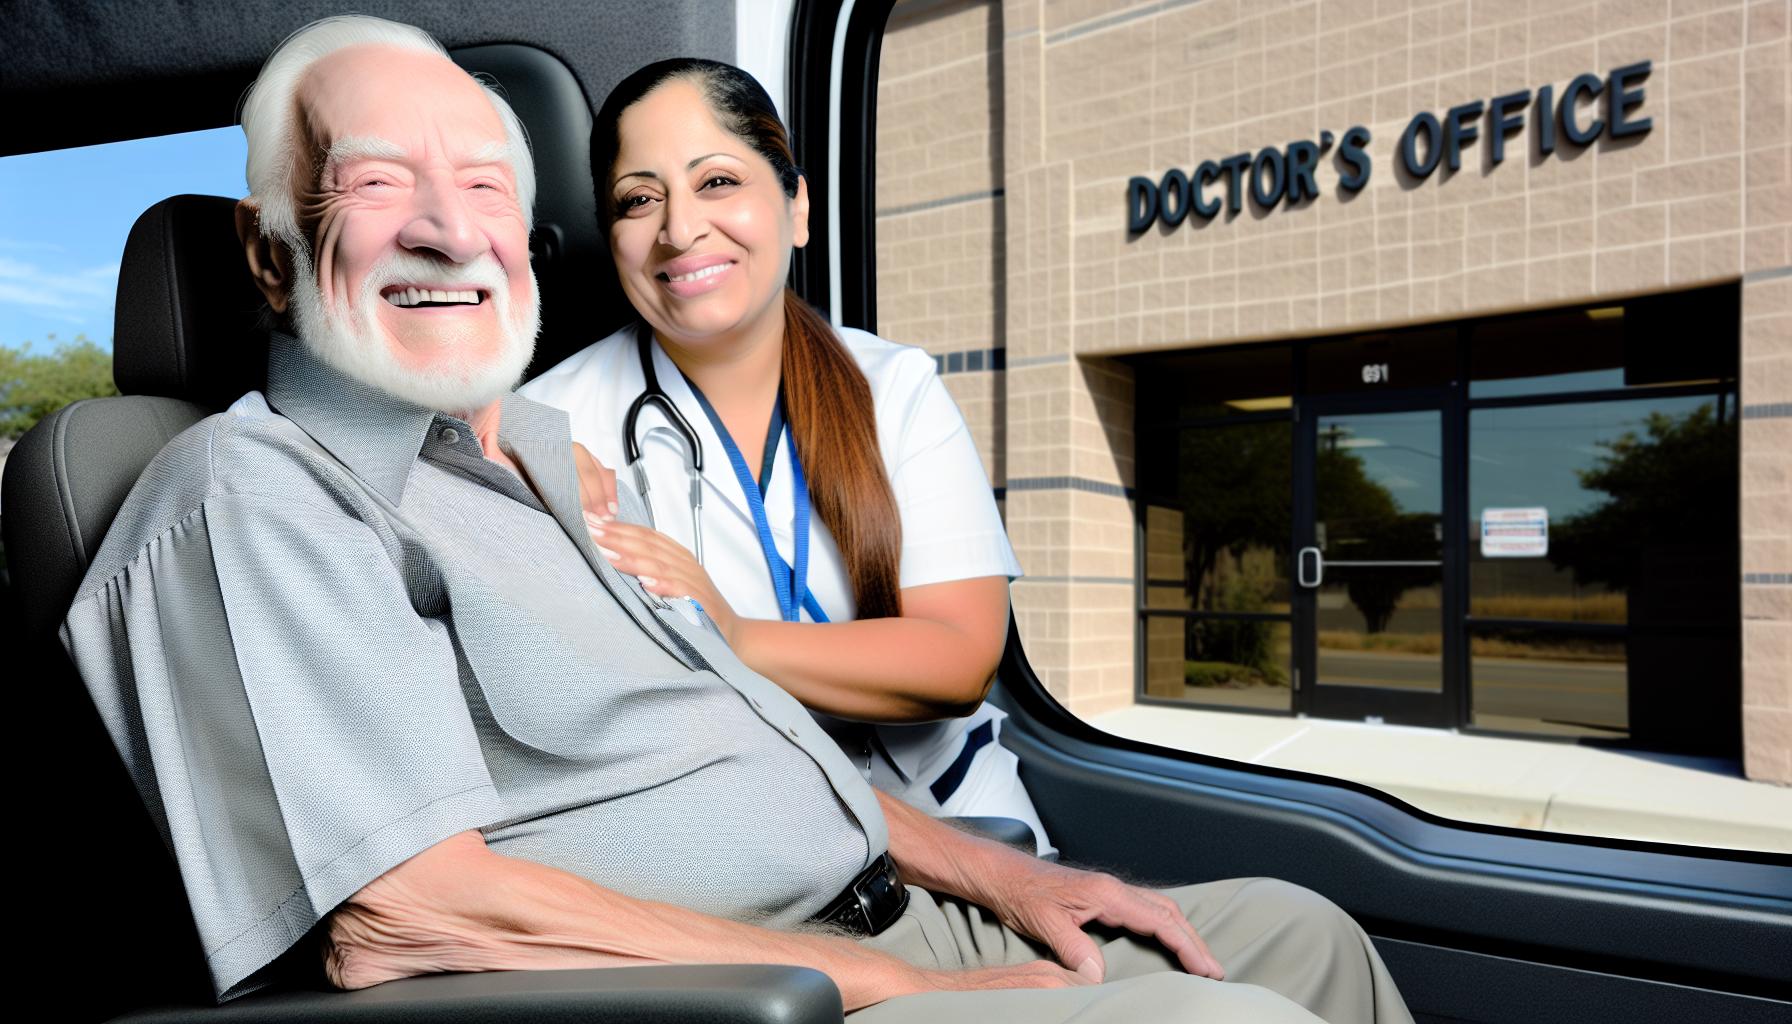 n elderly individual smiling warmly while seated comfortably in a vehicle with a caregiver beside them